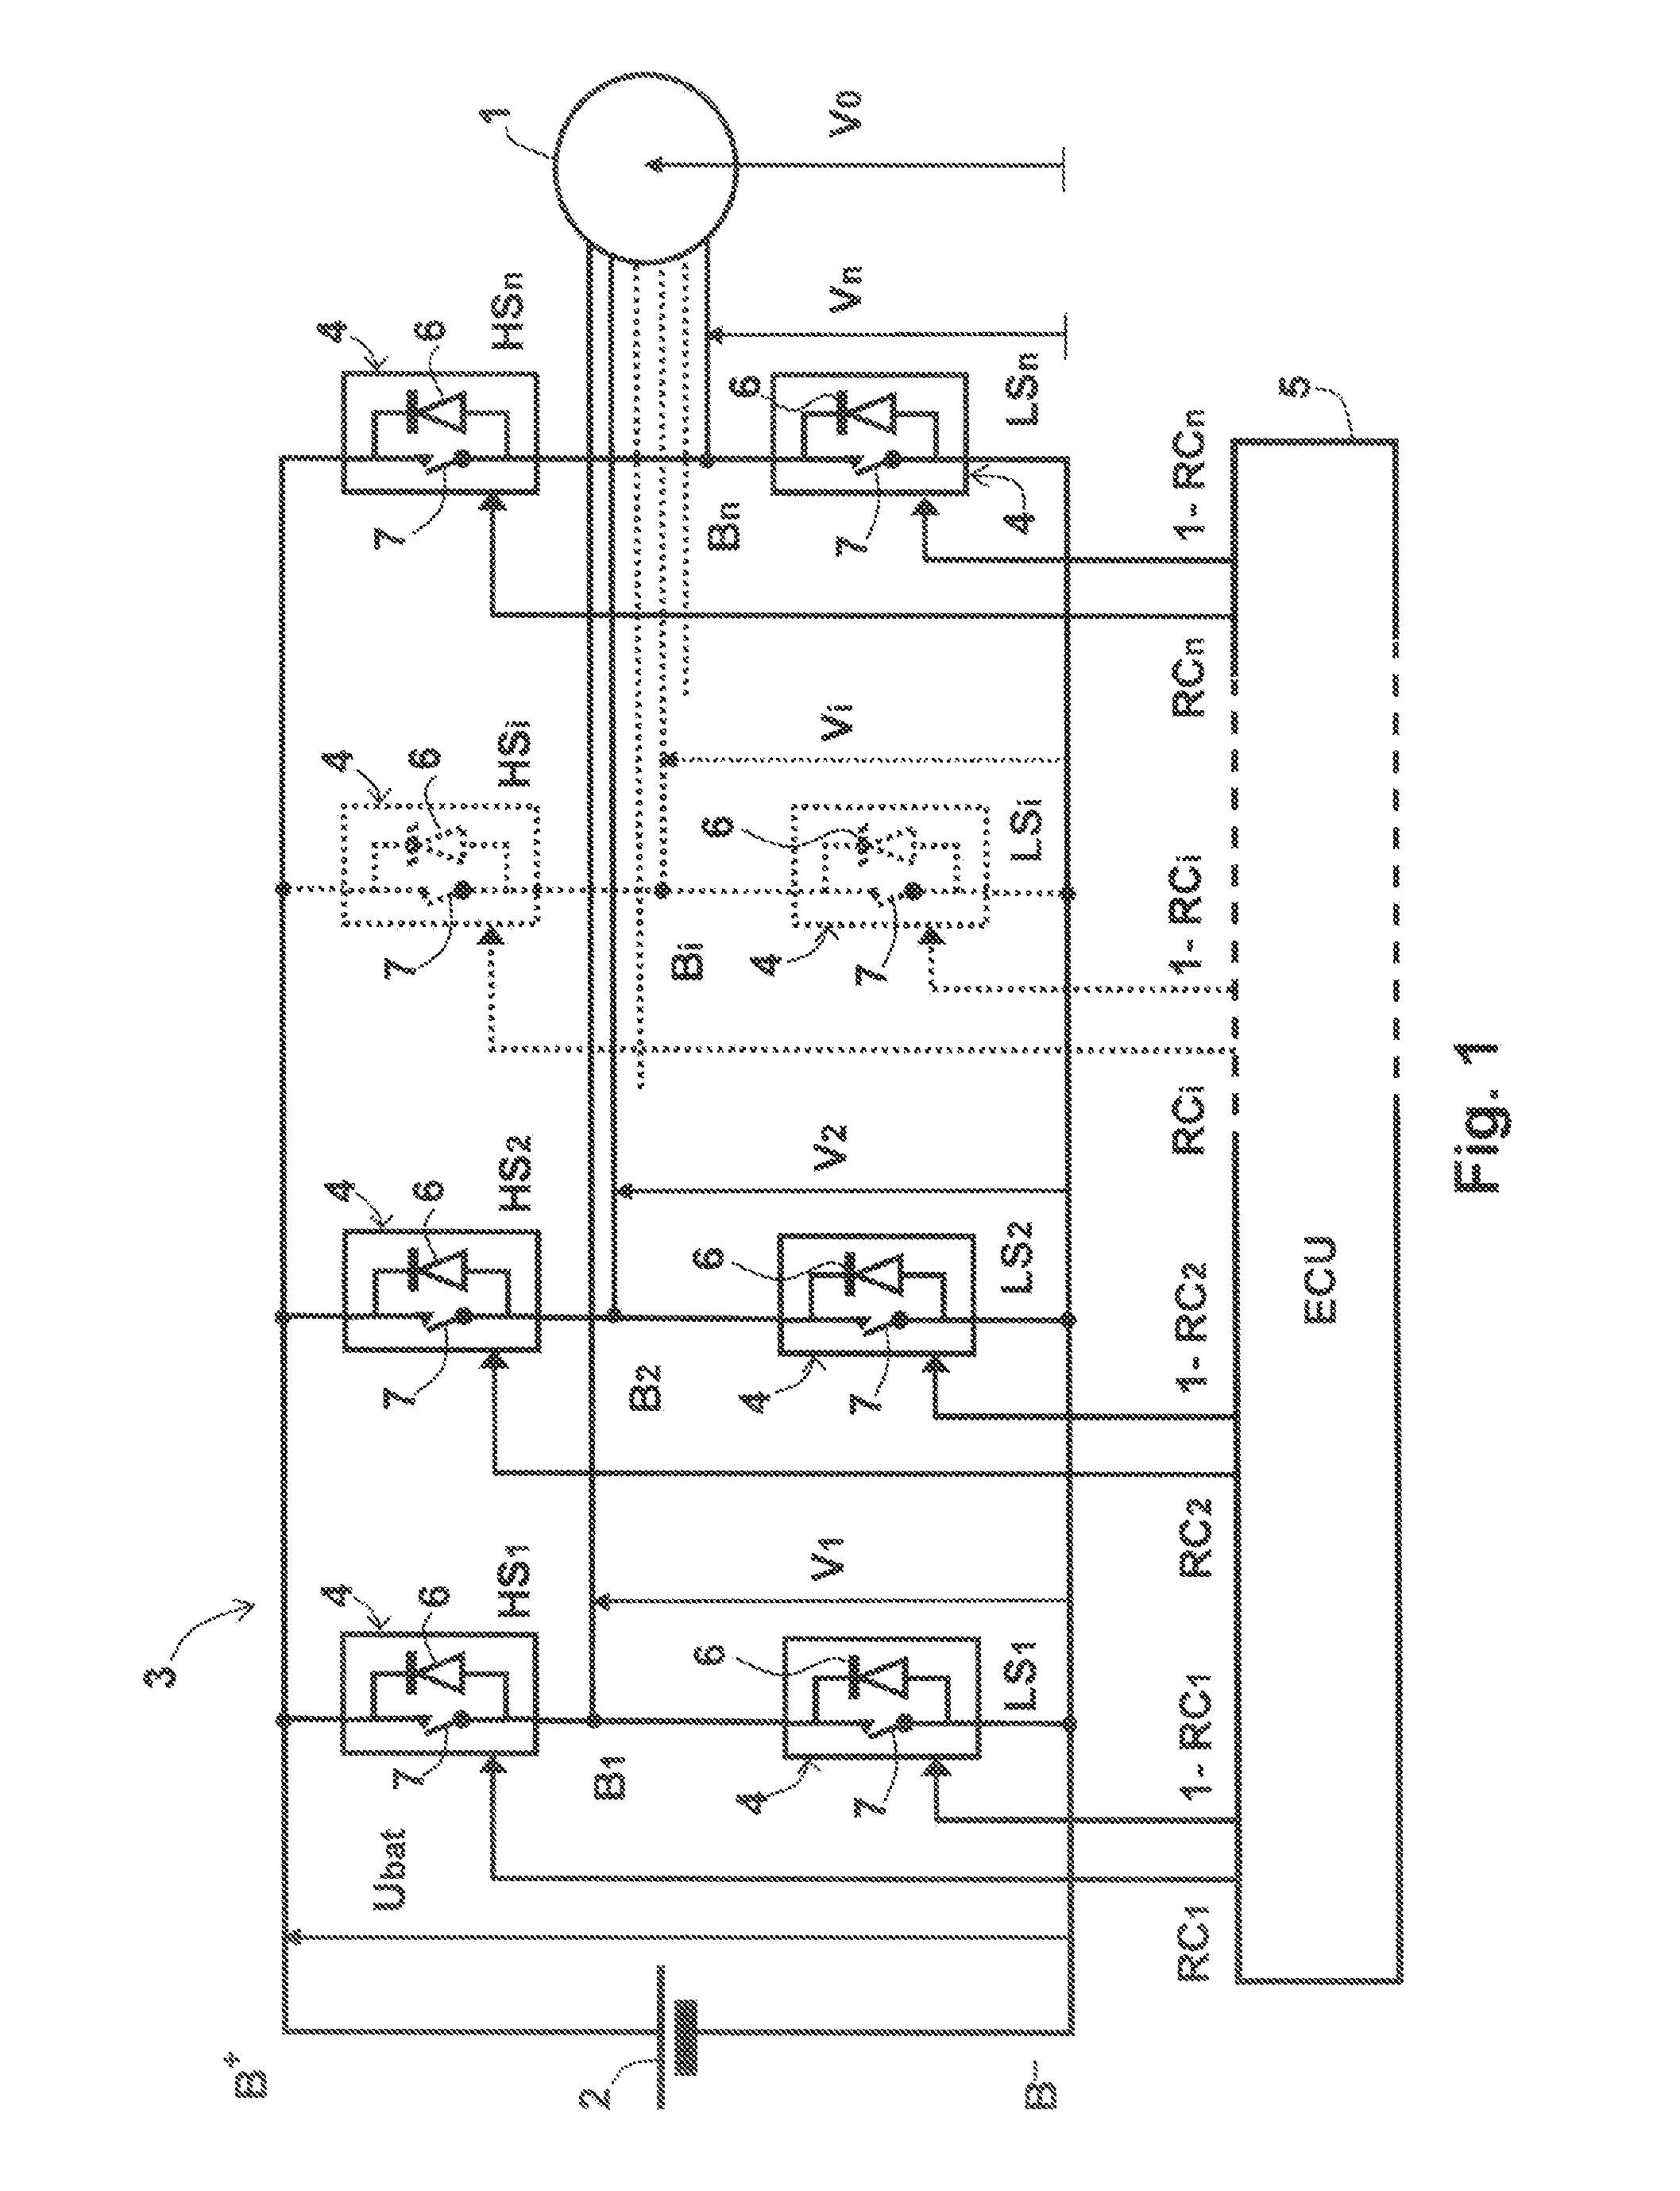 Method for controlling a power bridge, and corresponding control device, power bridge and rotary electric machine system